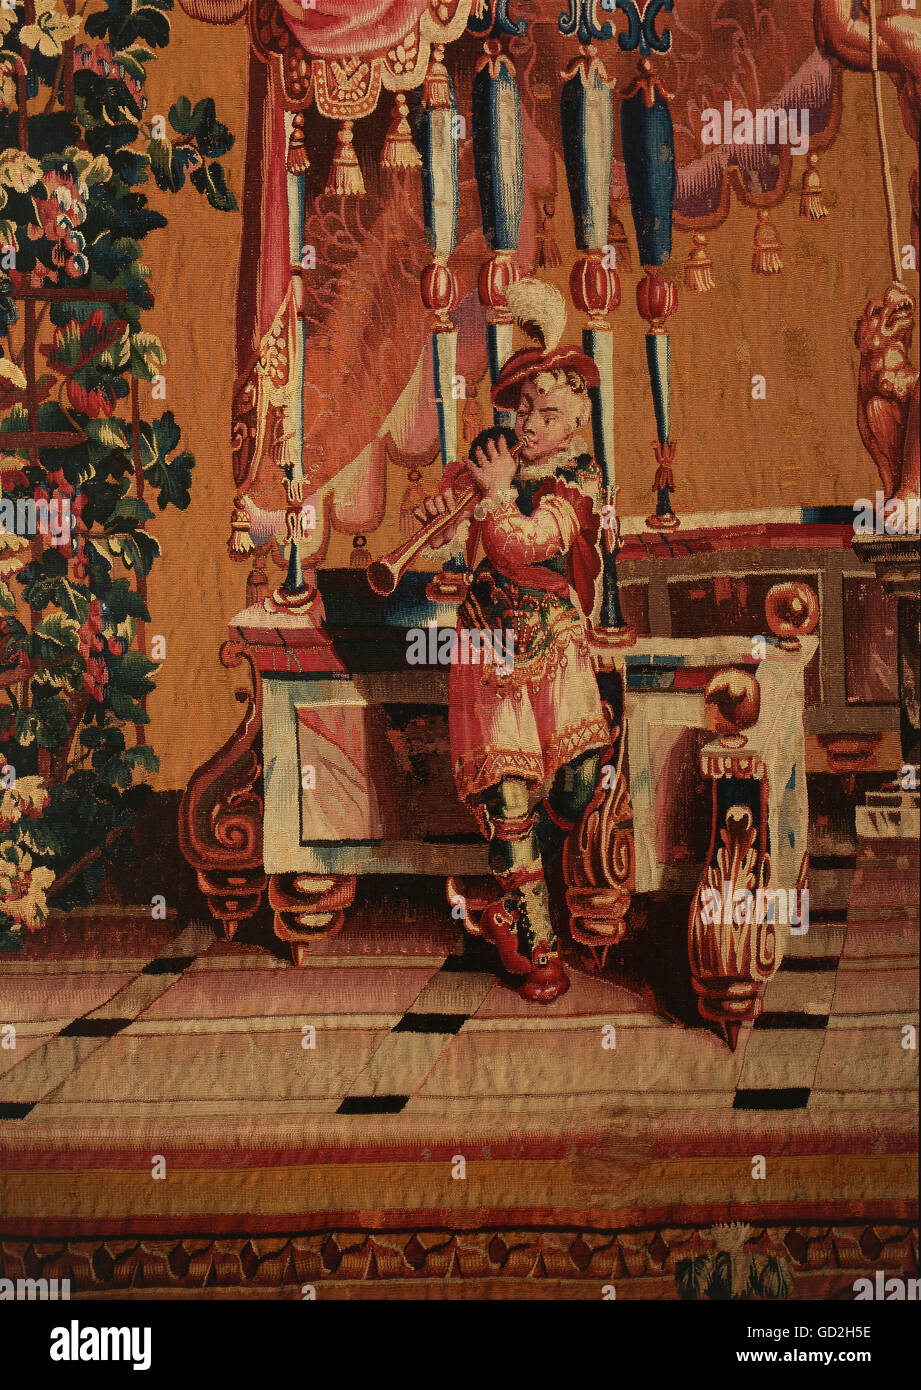 fine arts, tapestry, Dionysus with thyrsos, detail, clarinet player, from the grotesques series, by Philippe Behagle, after design by Jean Berain, Beauvais manufactory, circa 1700, silk, wool, knitted, 334 x 275 cm, Baden State Museum, Bruchsal castle, Artist's Copyright has not to be cleared Stock Photo